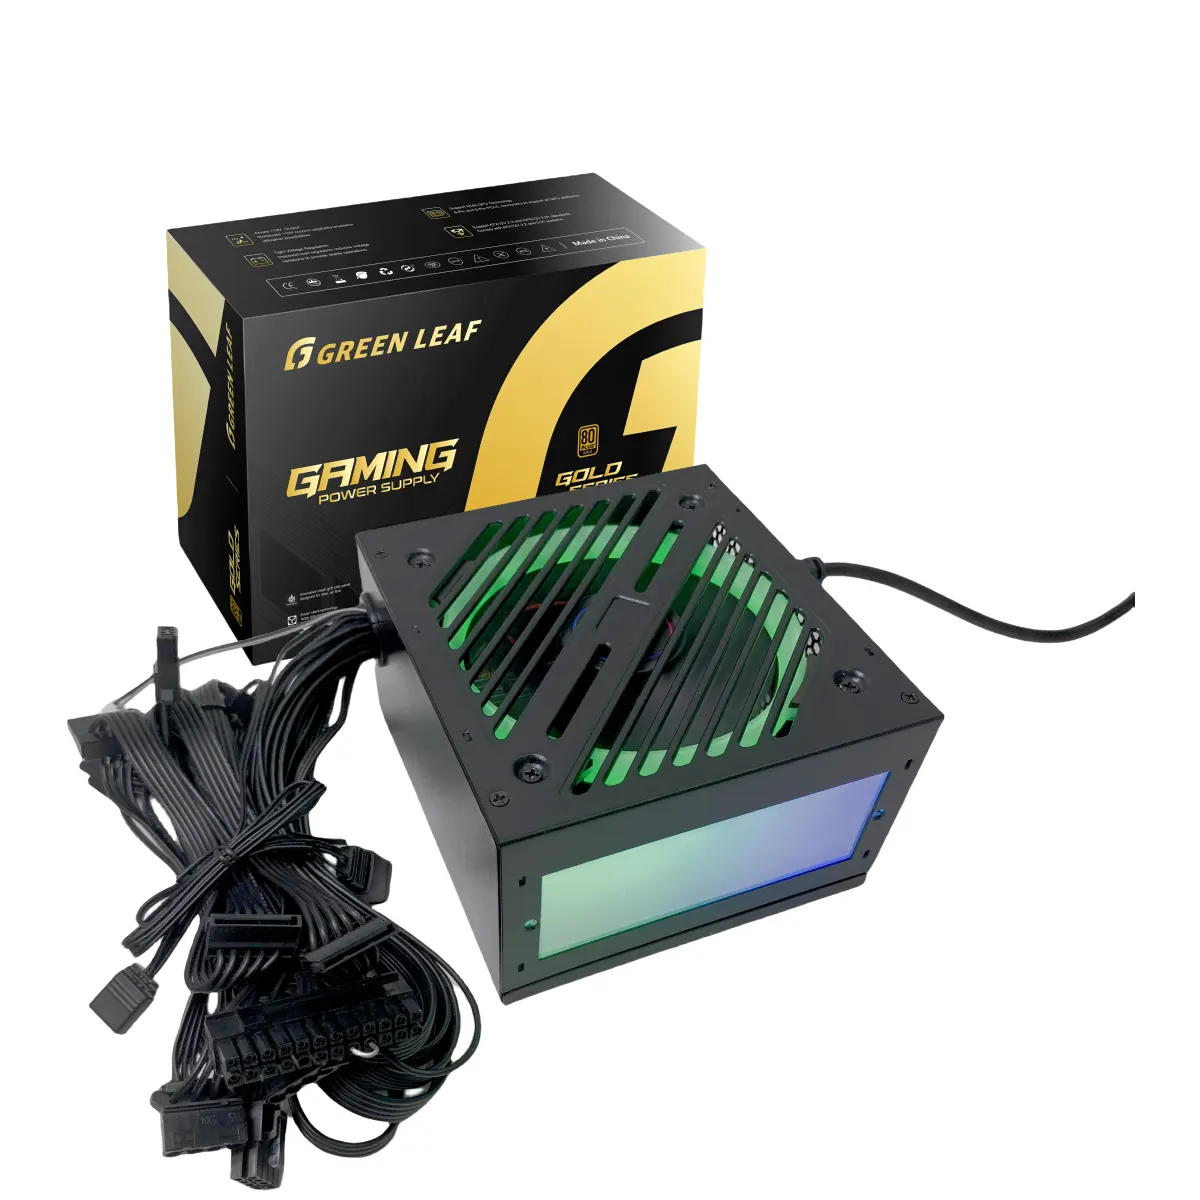 ATX 500W 600W 700W 800W Power Supply for PC Gaming 80 Plus Power Supply with 8 Pin Connector High Efficiency PC Power Supplies